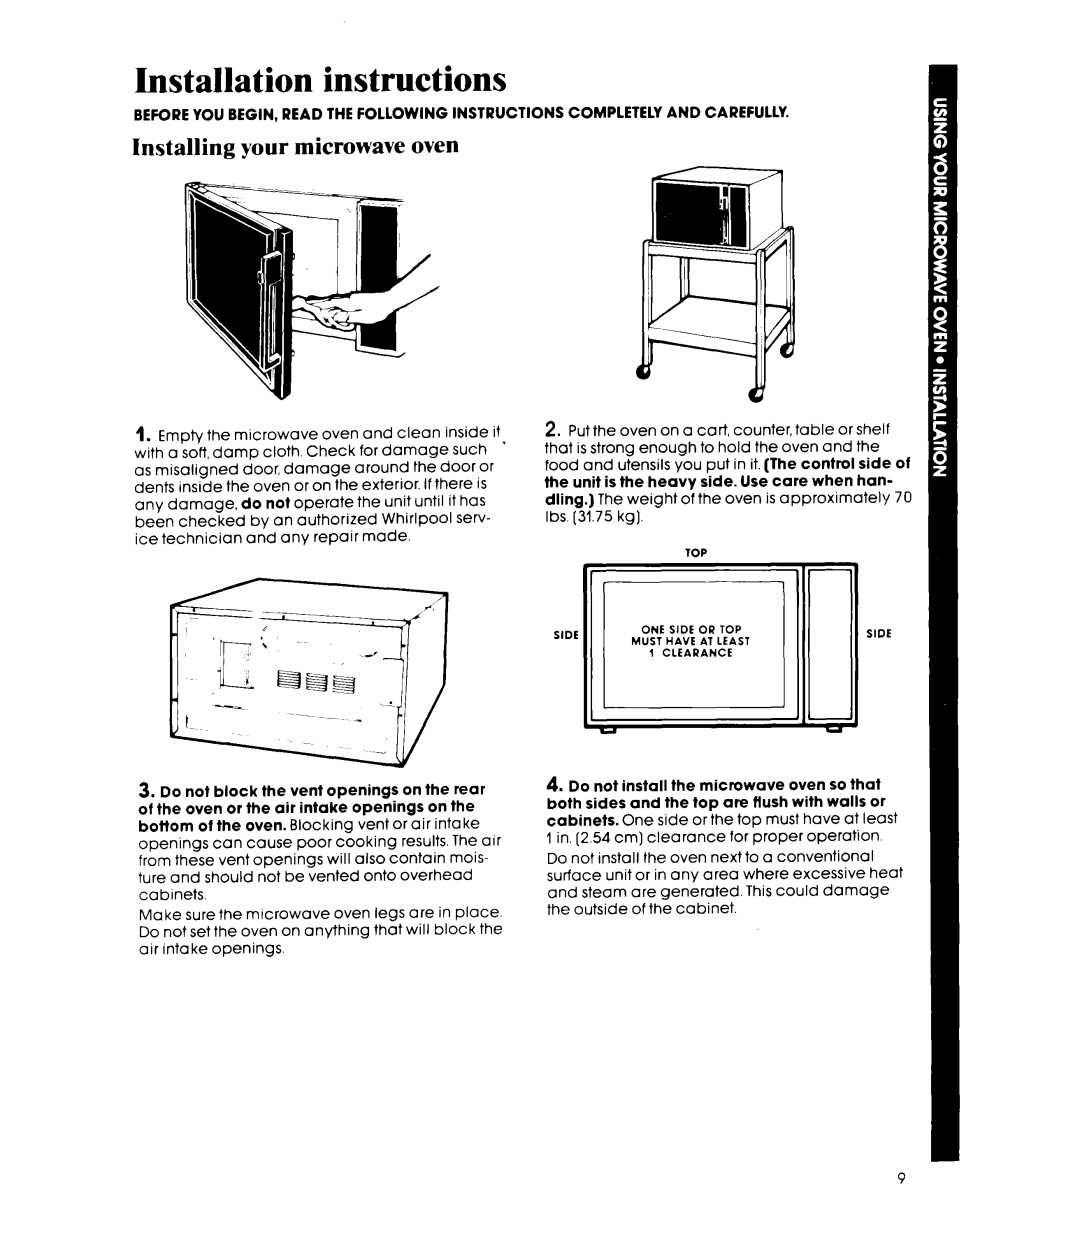 Whirlpool MW81OOXP manual Installing your microwave oven, Installation instructions 